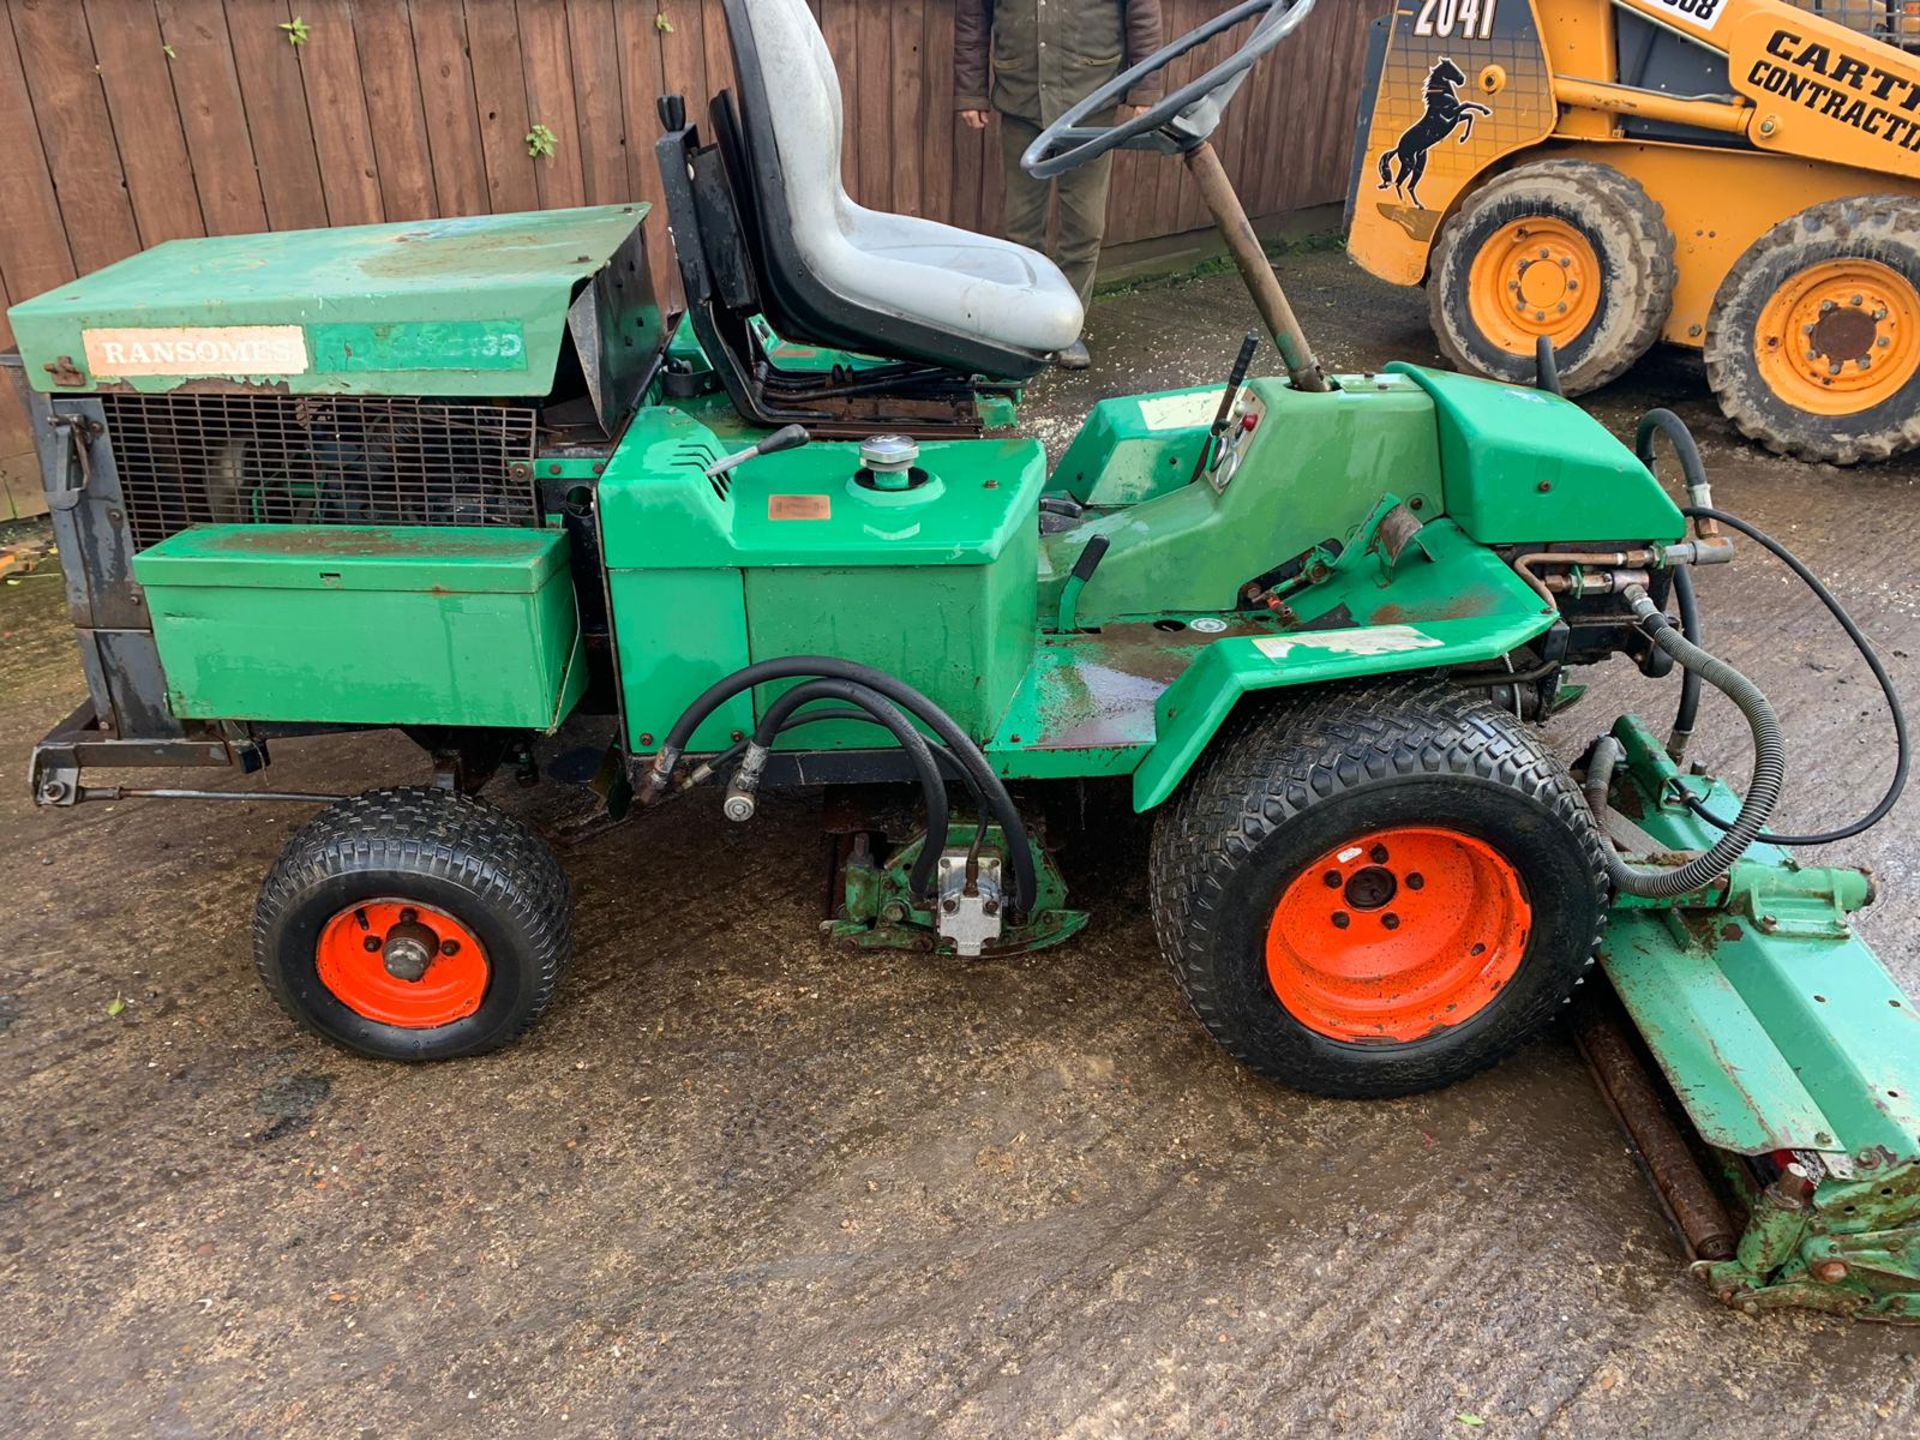 Ransomes Highway 213D Triple Cylinder Mower - Image 5 of 5